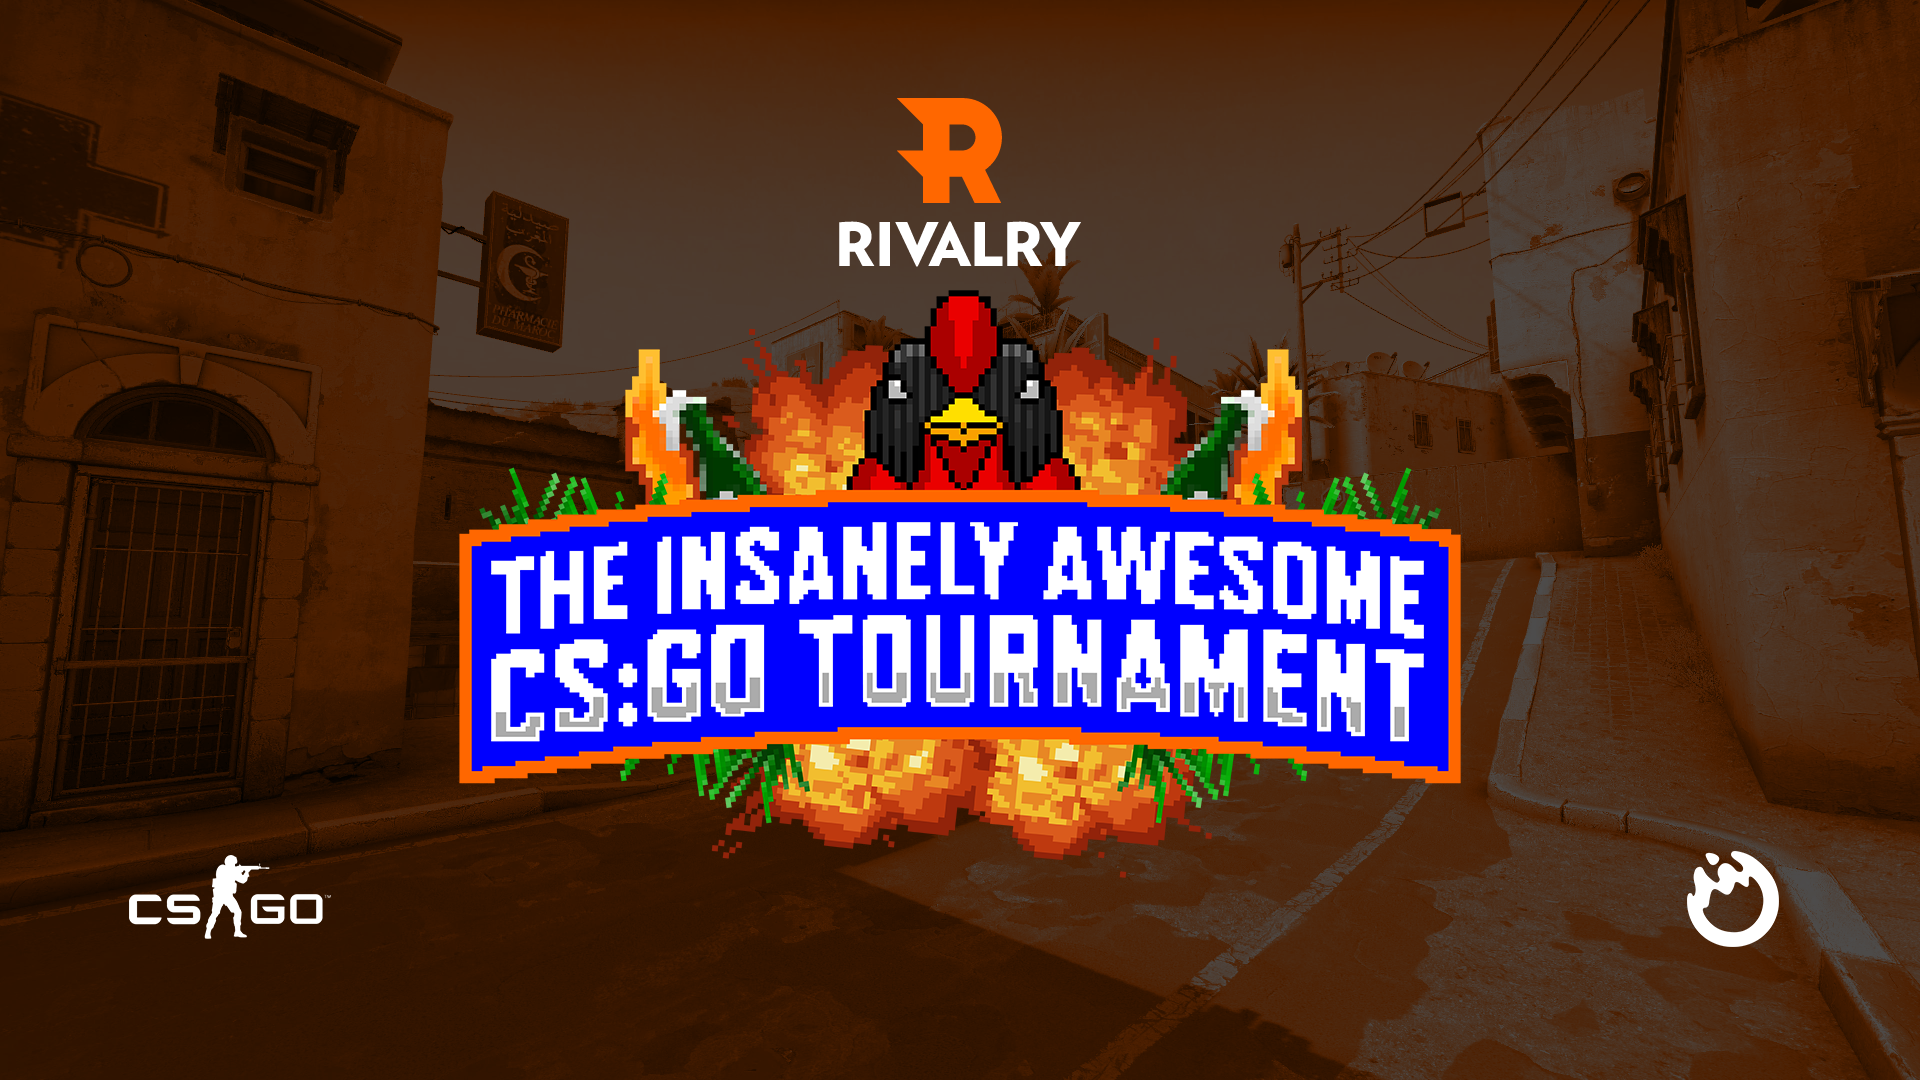 Rivalry's Insanely Awesome CS:GO Tournament: Order defeat Paradox in four-map thriller